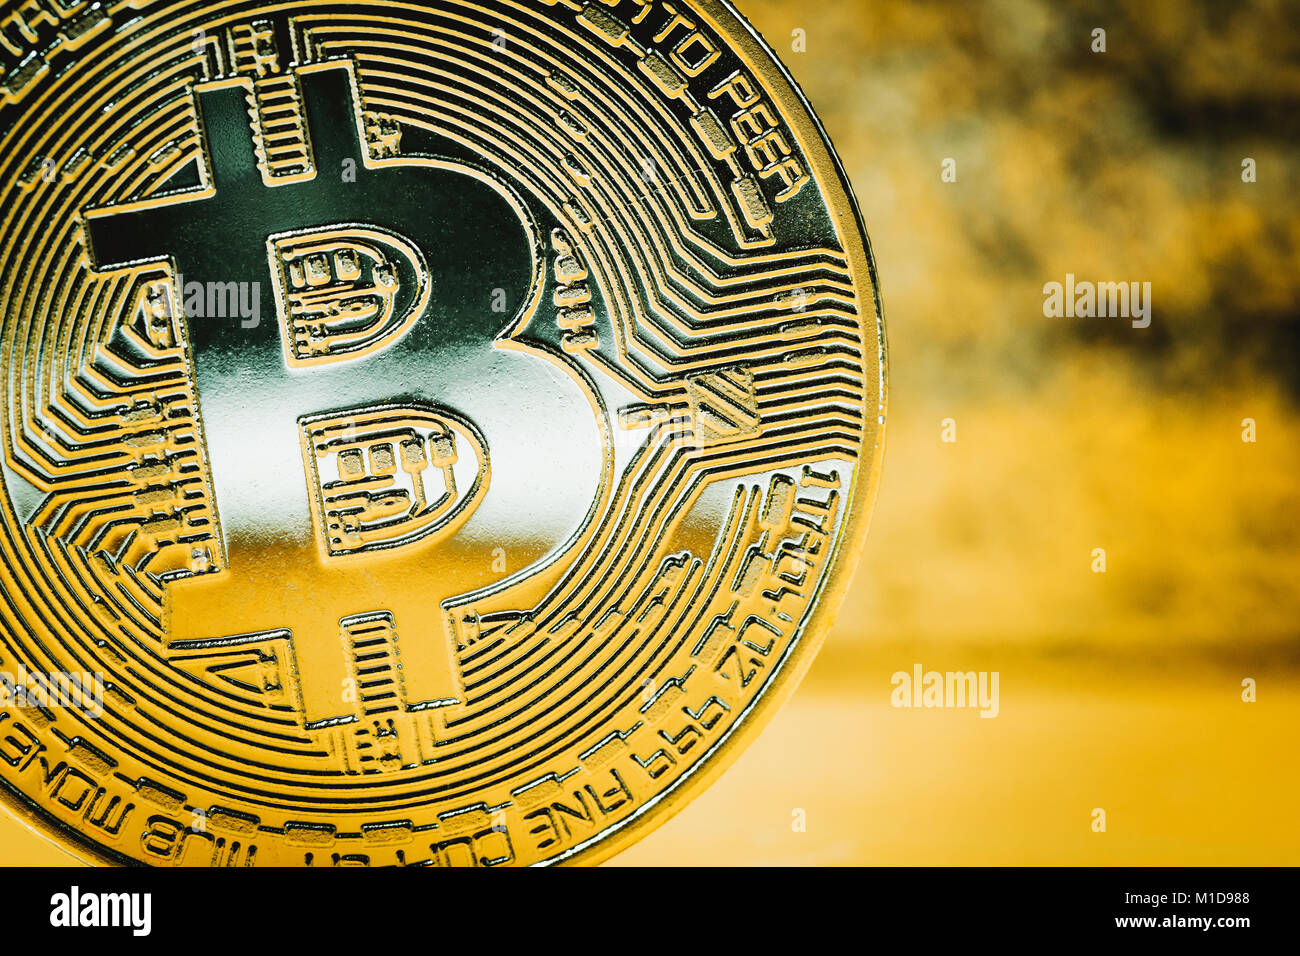 Golden bitcoin on a blurred background. Close up Stock Photo